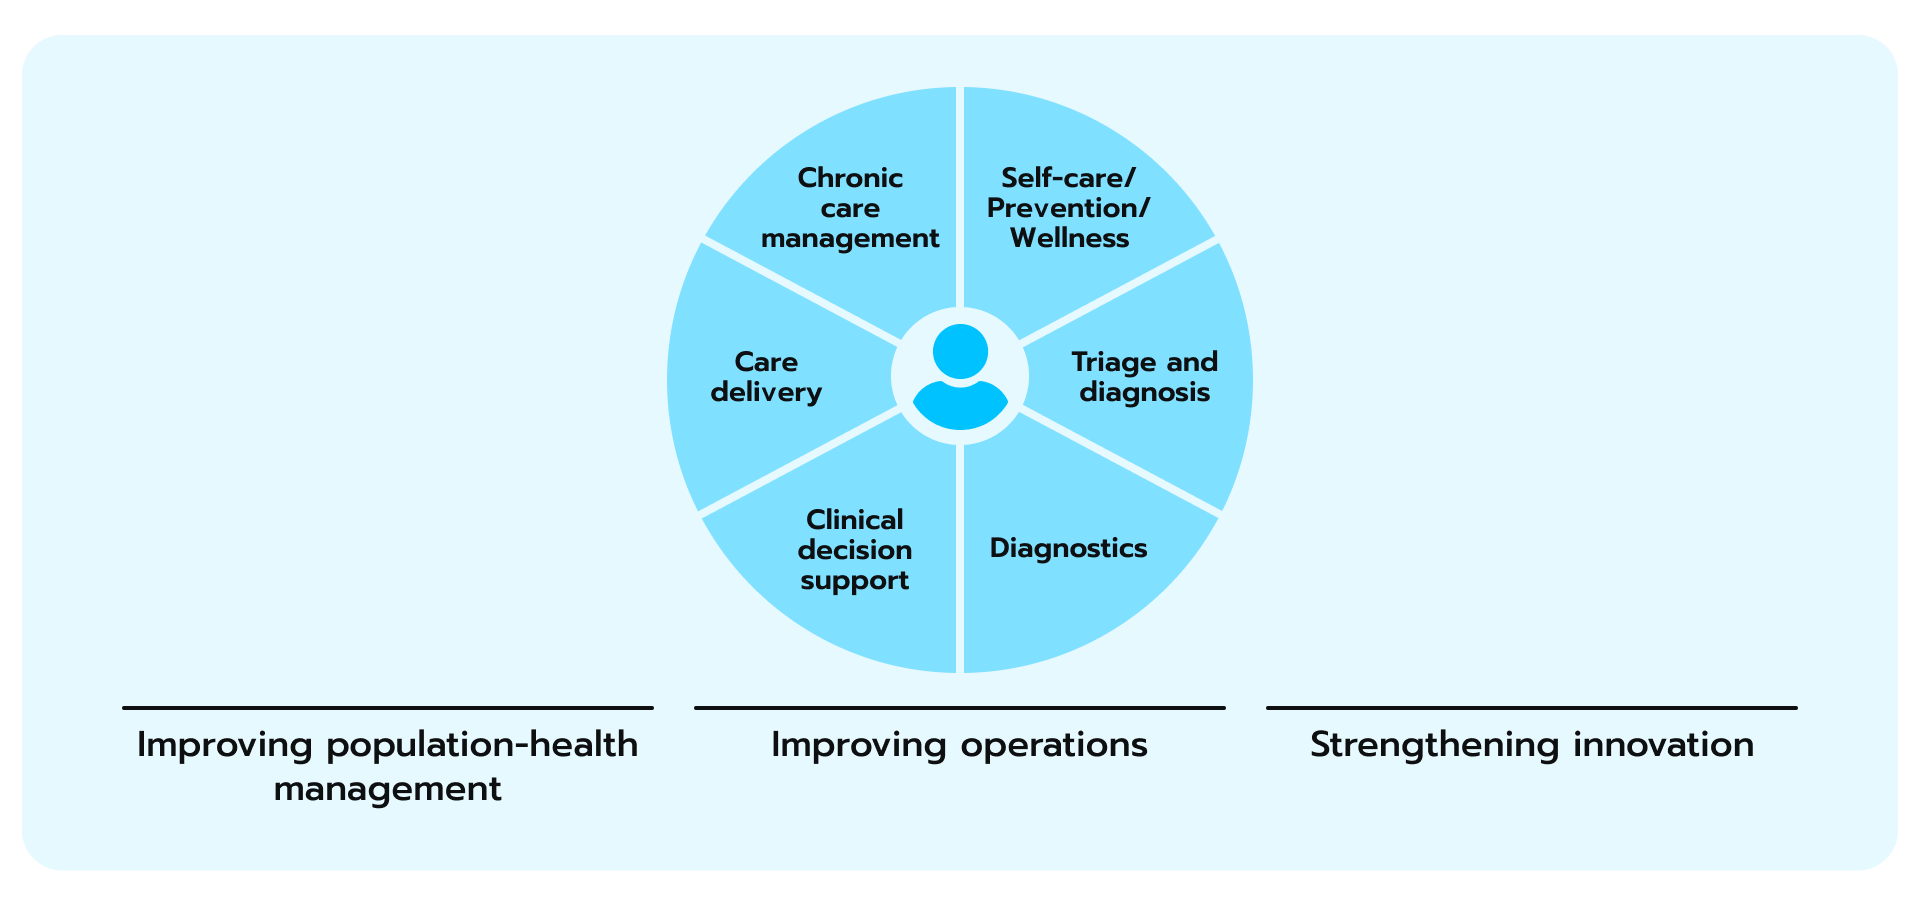 Areas of healthcare according to McKinsey